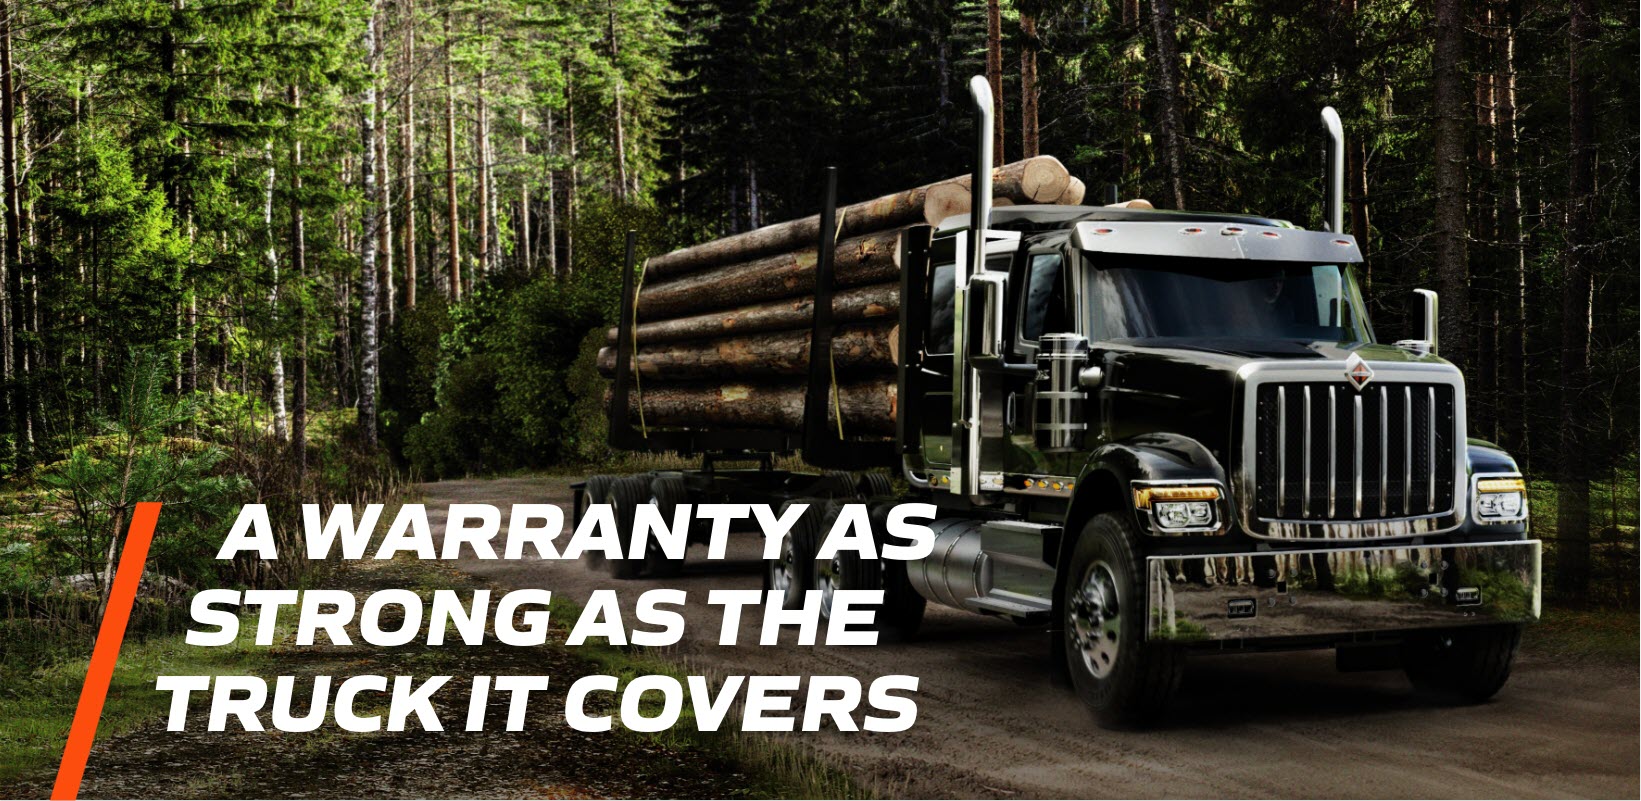 HX Series Logging Truck Text A Warranty As Strong As The Truck It Covers